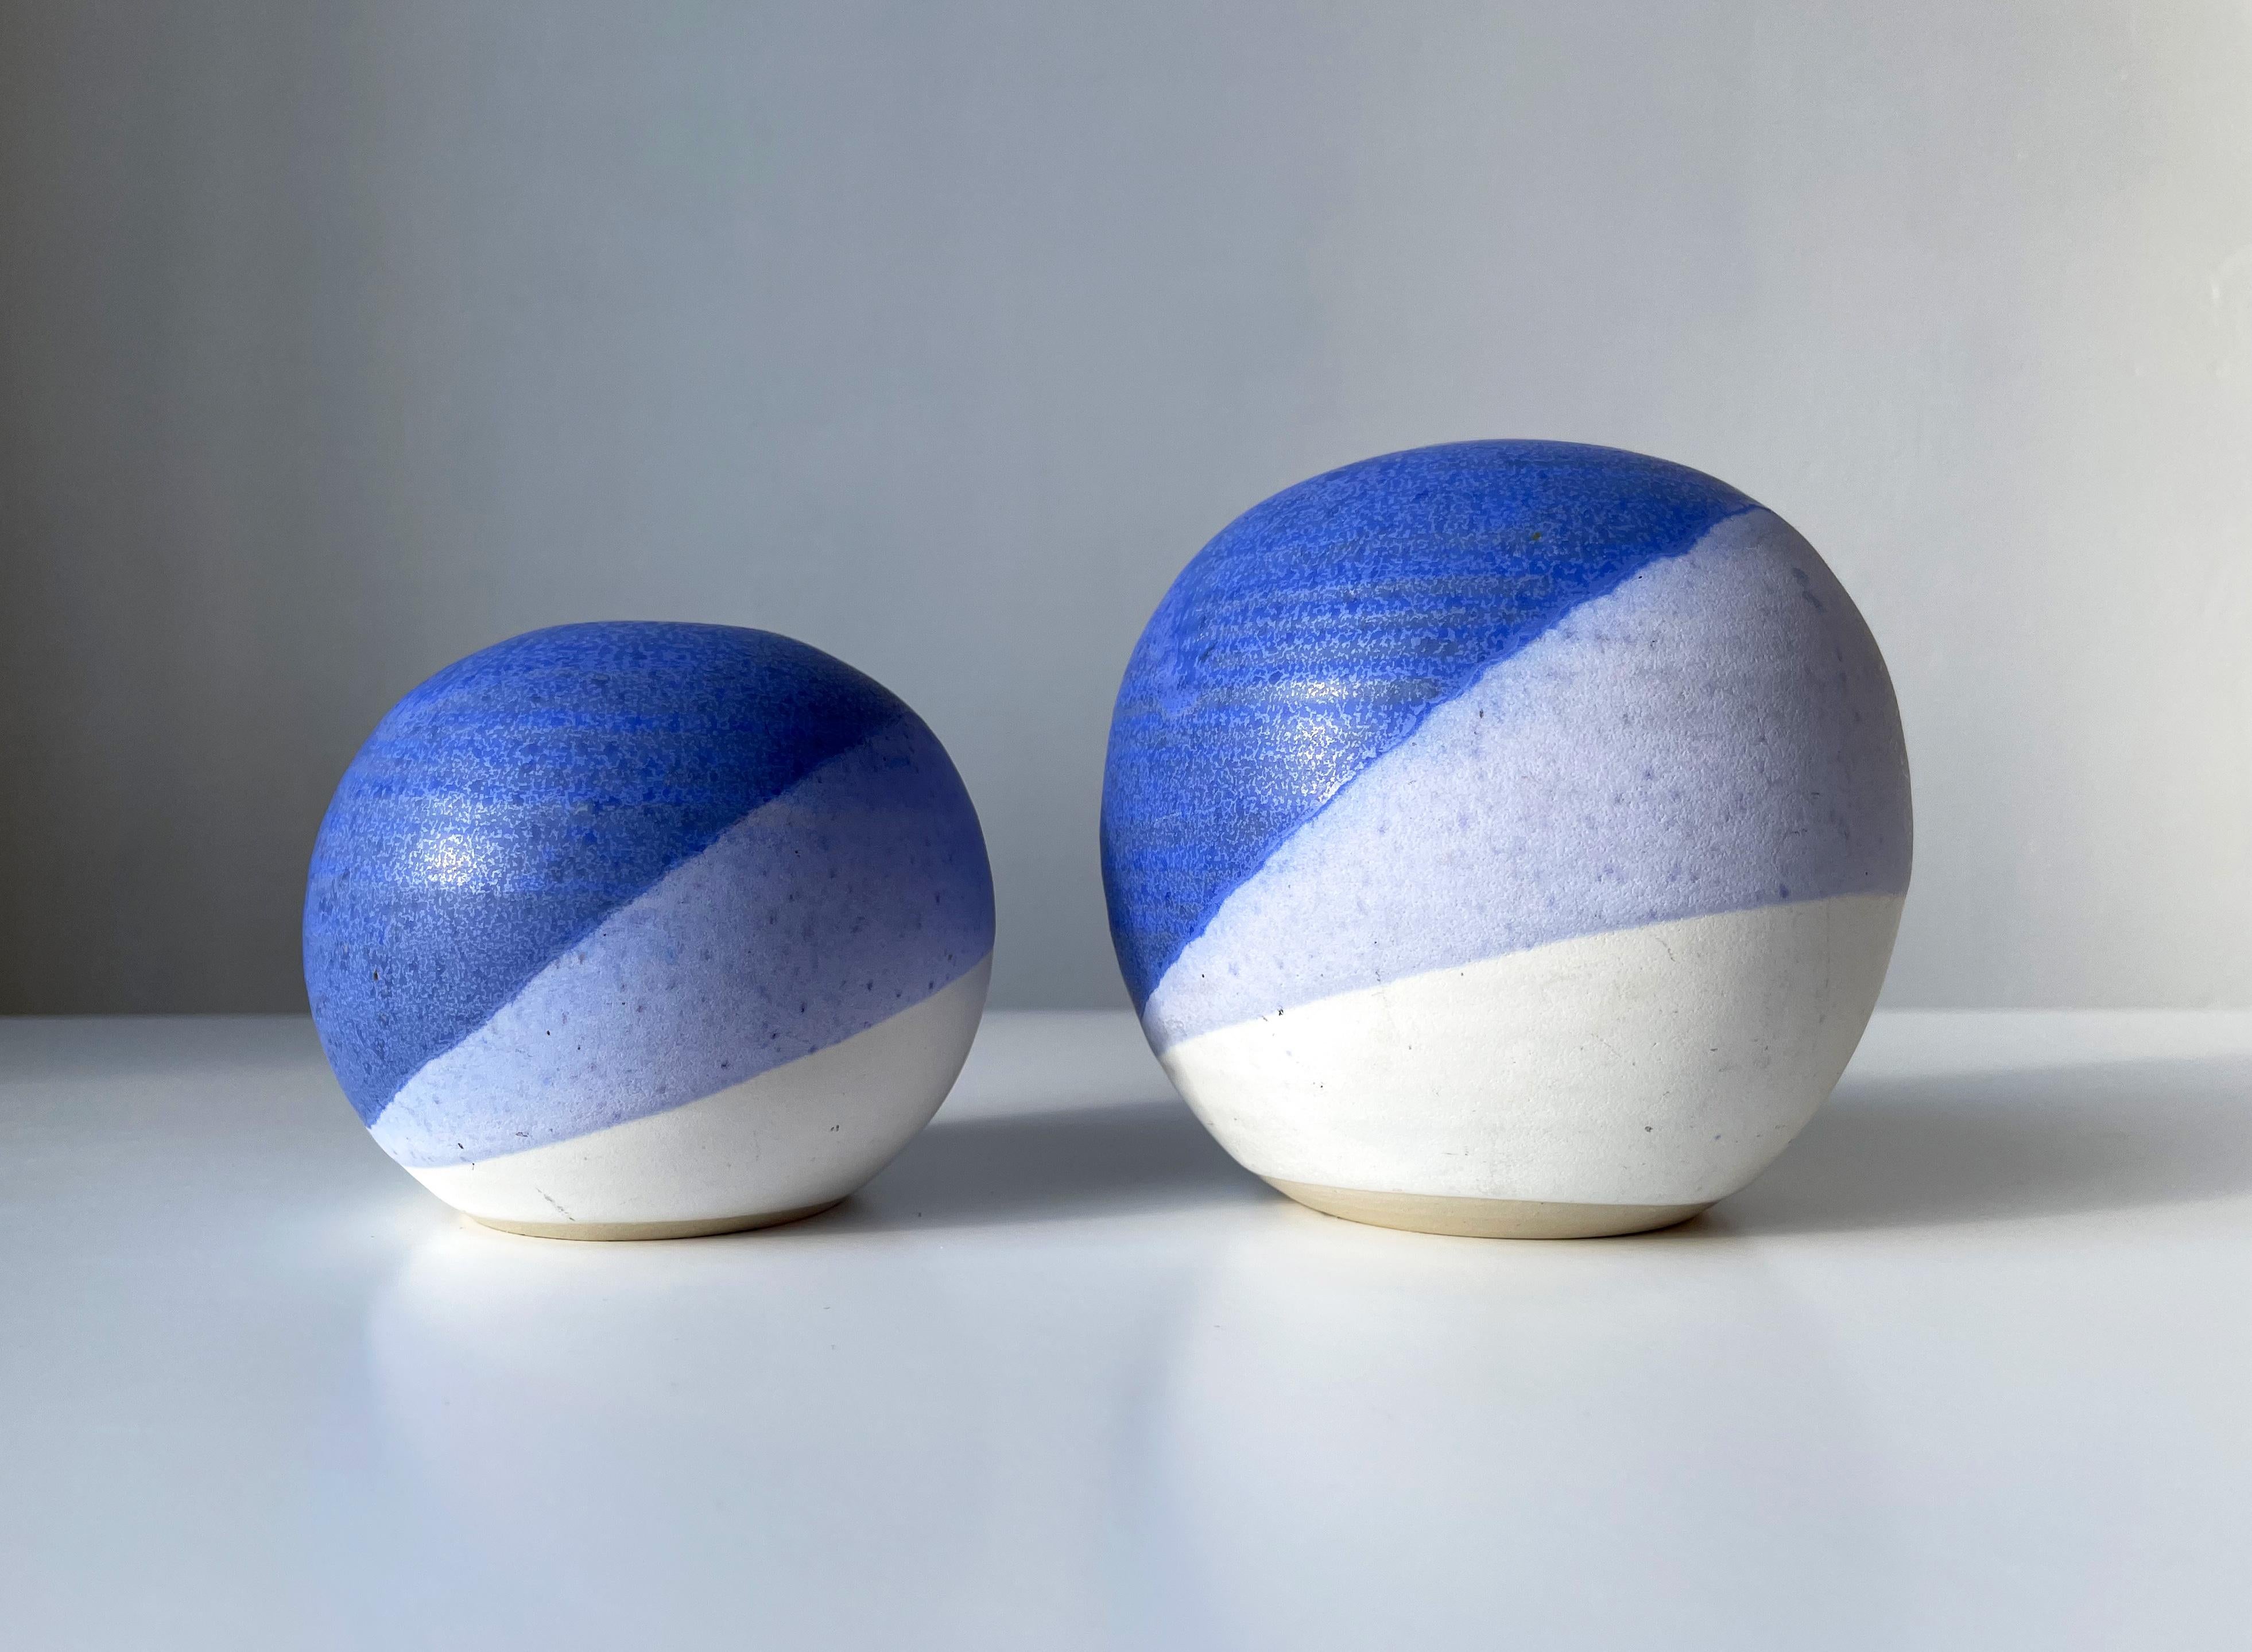 Set of two Danish modernist ceramic globe vases or candle holders. Shiny blue glaze over matte lilac and white glaze in asymmetrical stripes accentuating the round shape. Manufactured in Denmark by KN Keramik in the 1980s. Both vases signed under